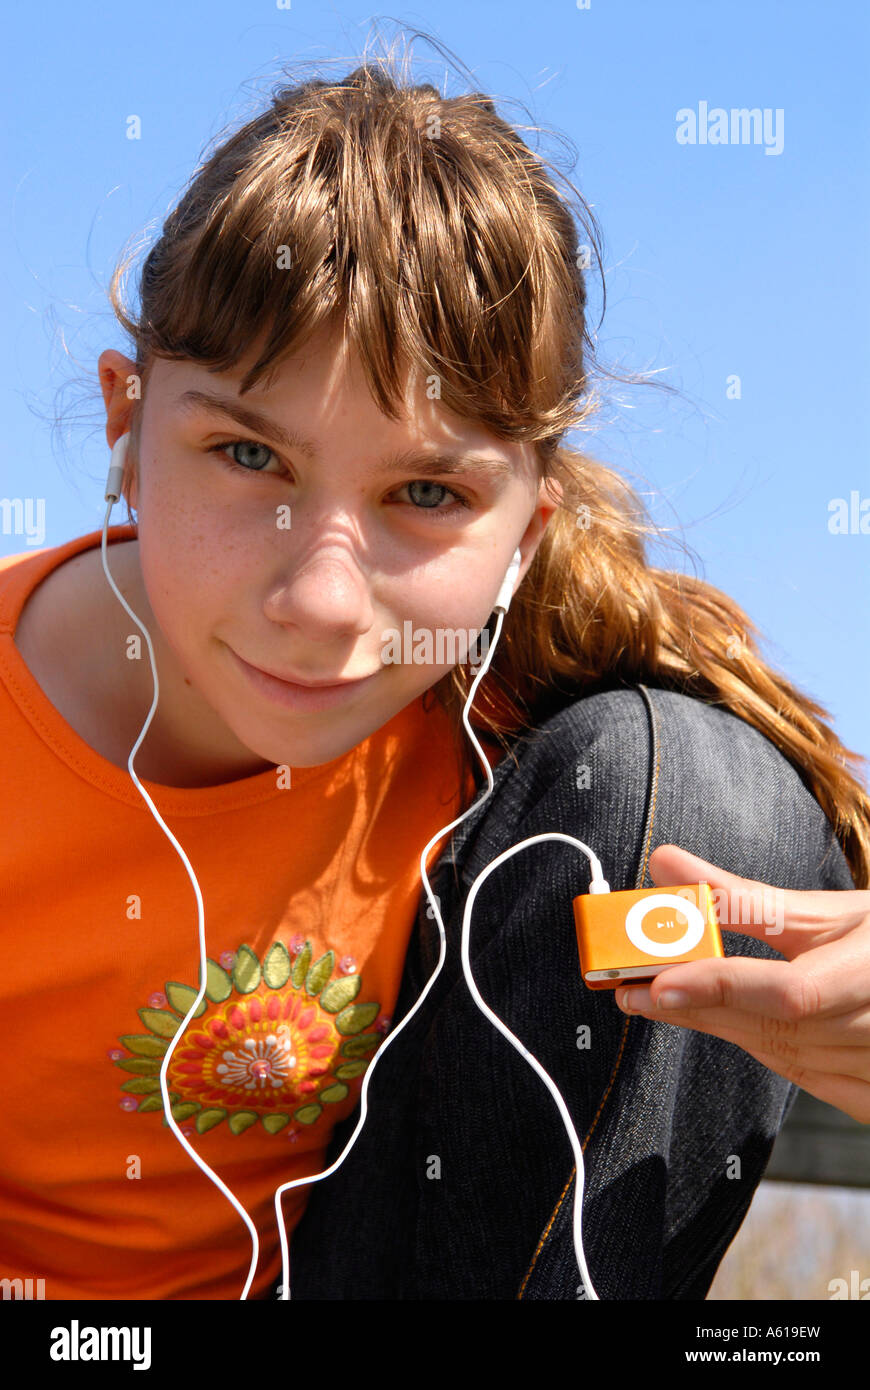 Girl hears music with the Apple IPod shuffle2 MP3 Player Stock Photo